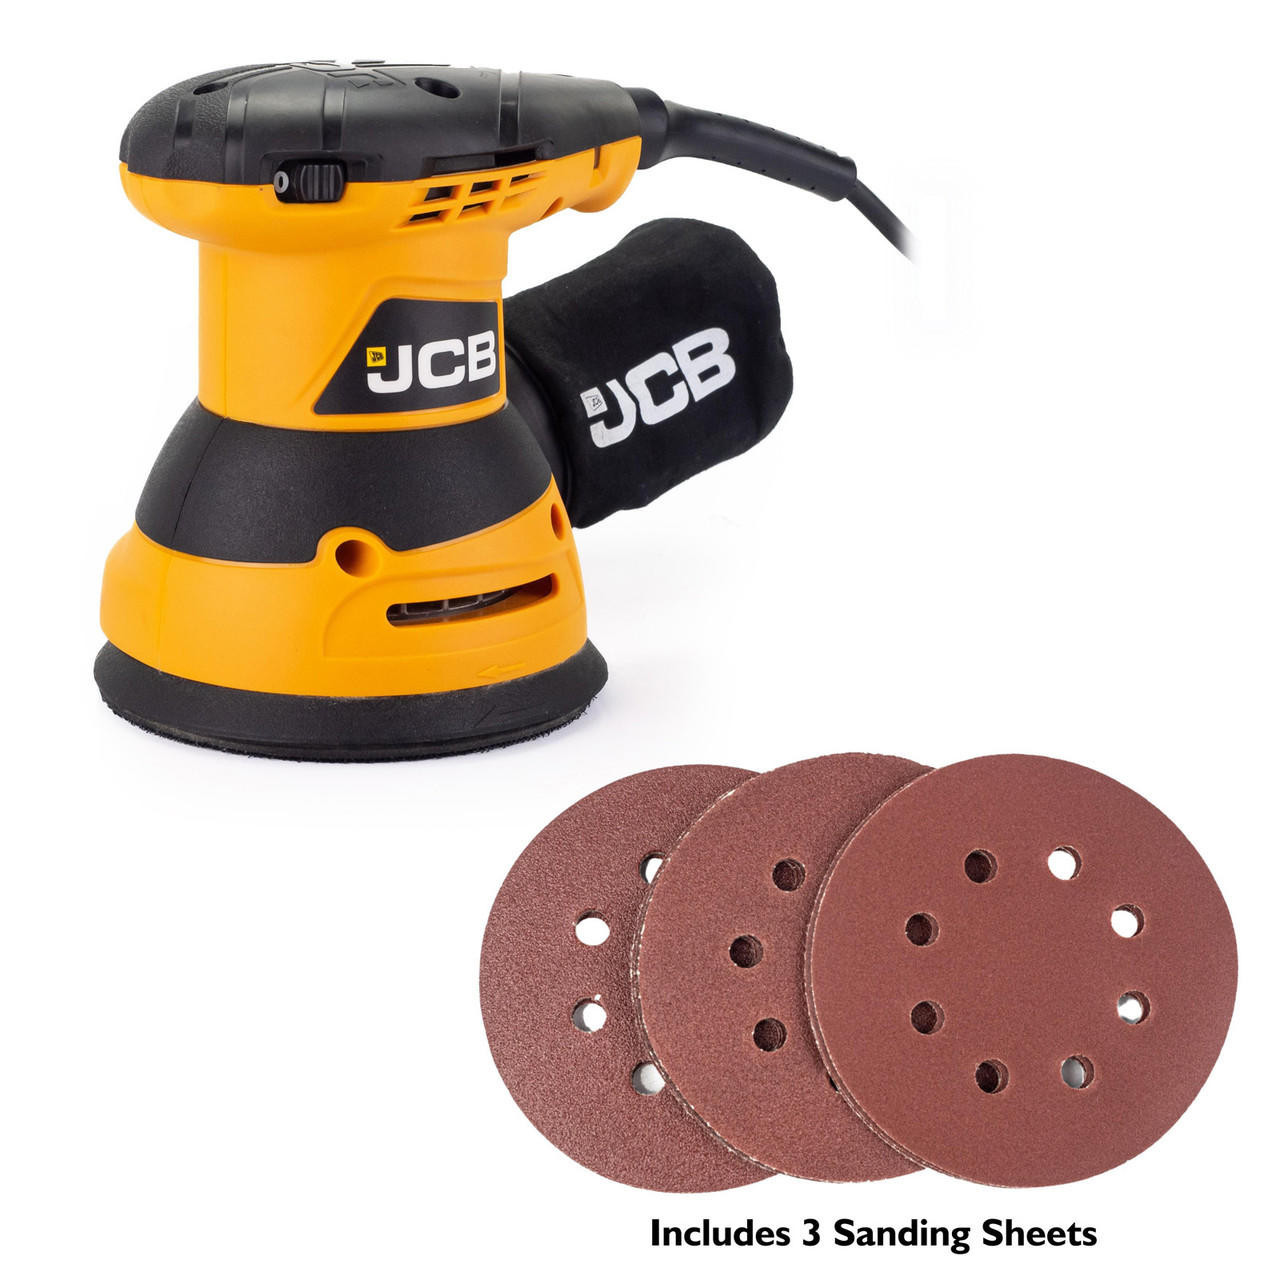 JCB 18V Cordless Brushless Impact Driver with 5.0Ah Lithium-ion battery in L-Boxx 136 Case | Shop Online